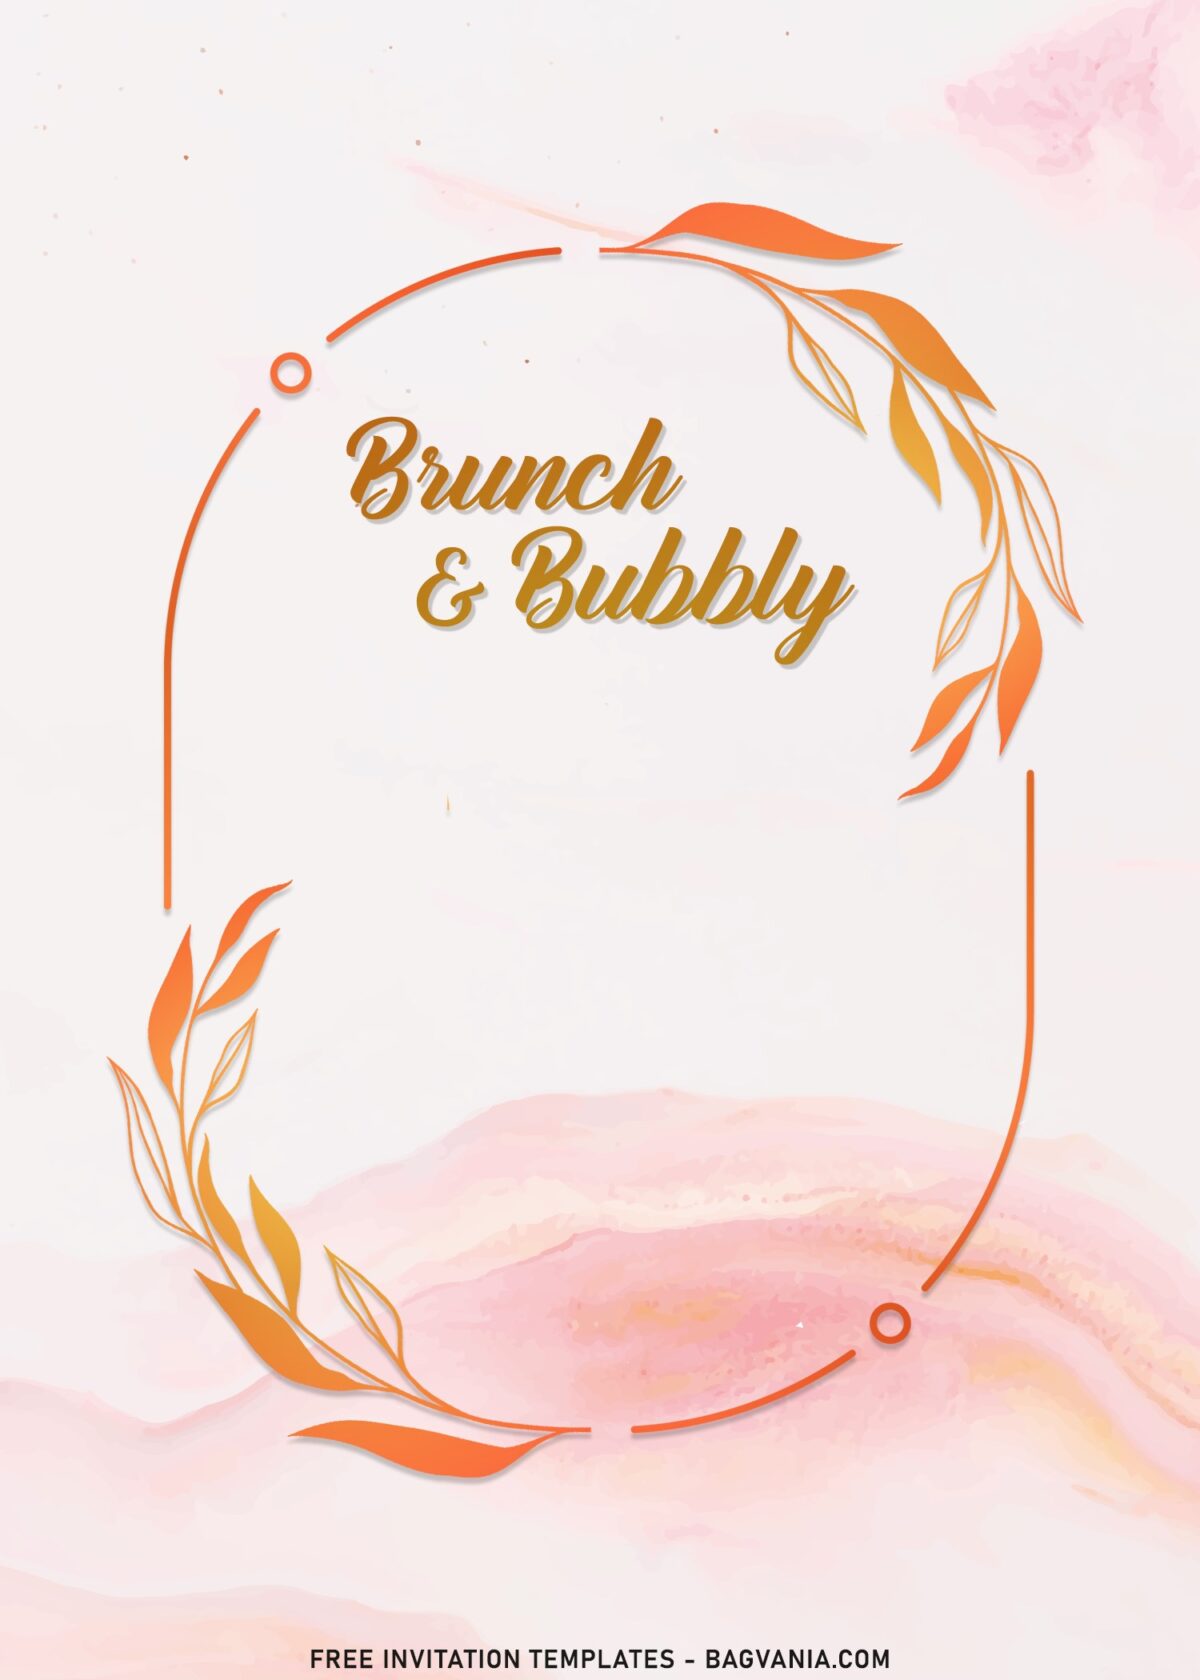 8+ Classy Brunch And Bubbly Party Invitation Templates with metallic gold floral frame